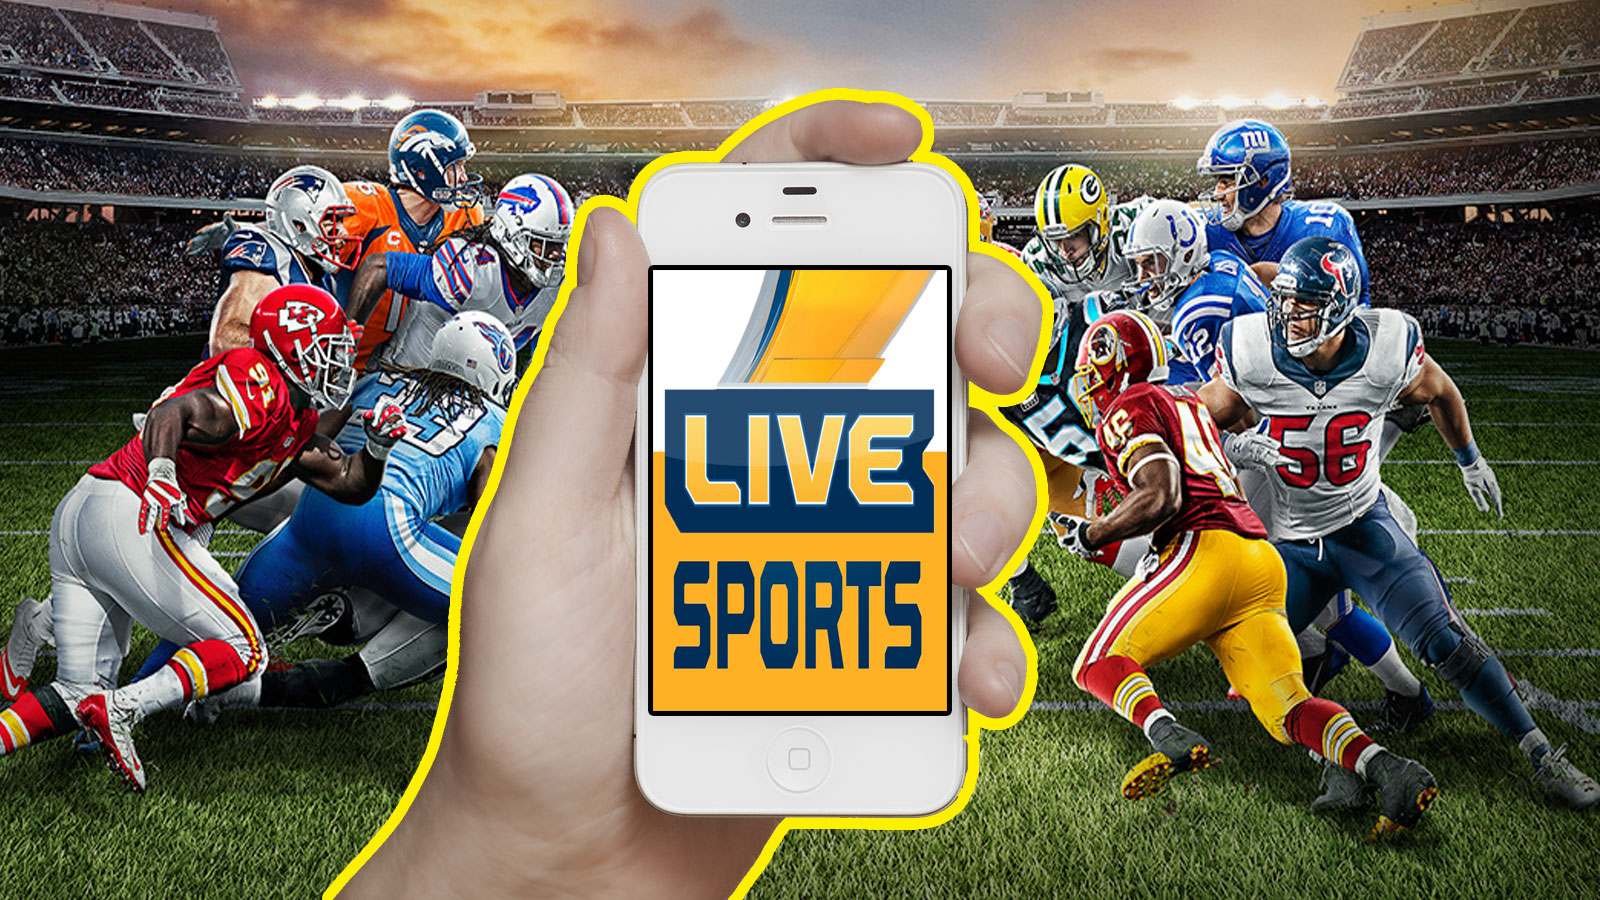 free sport live streaming